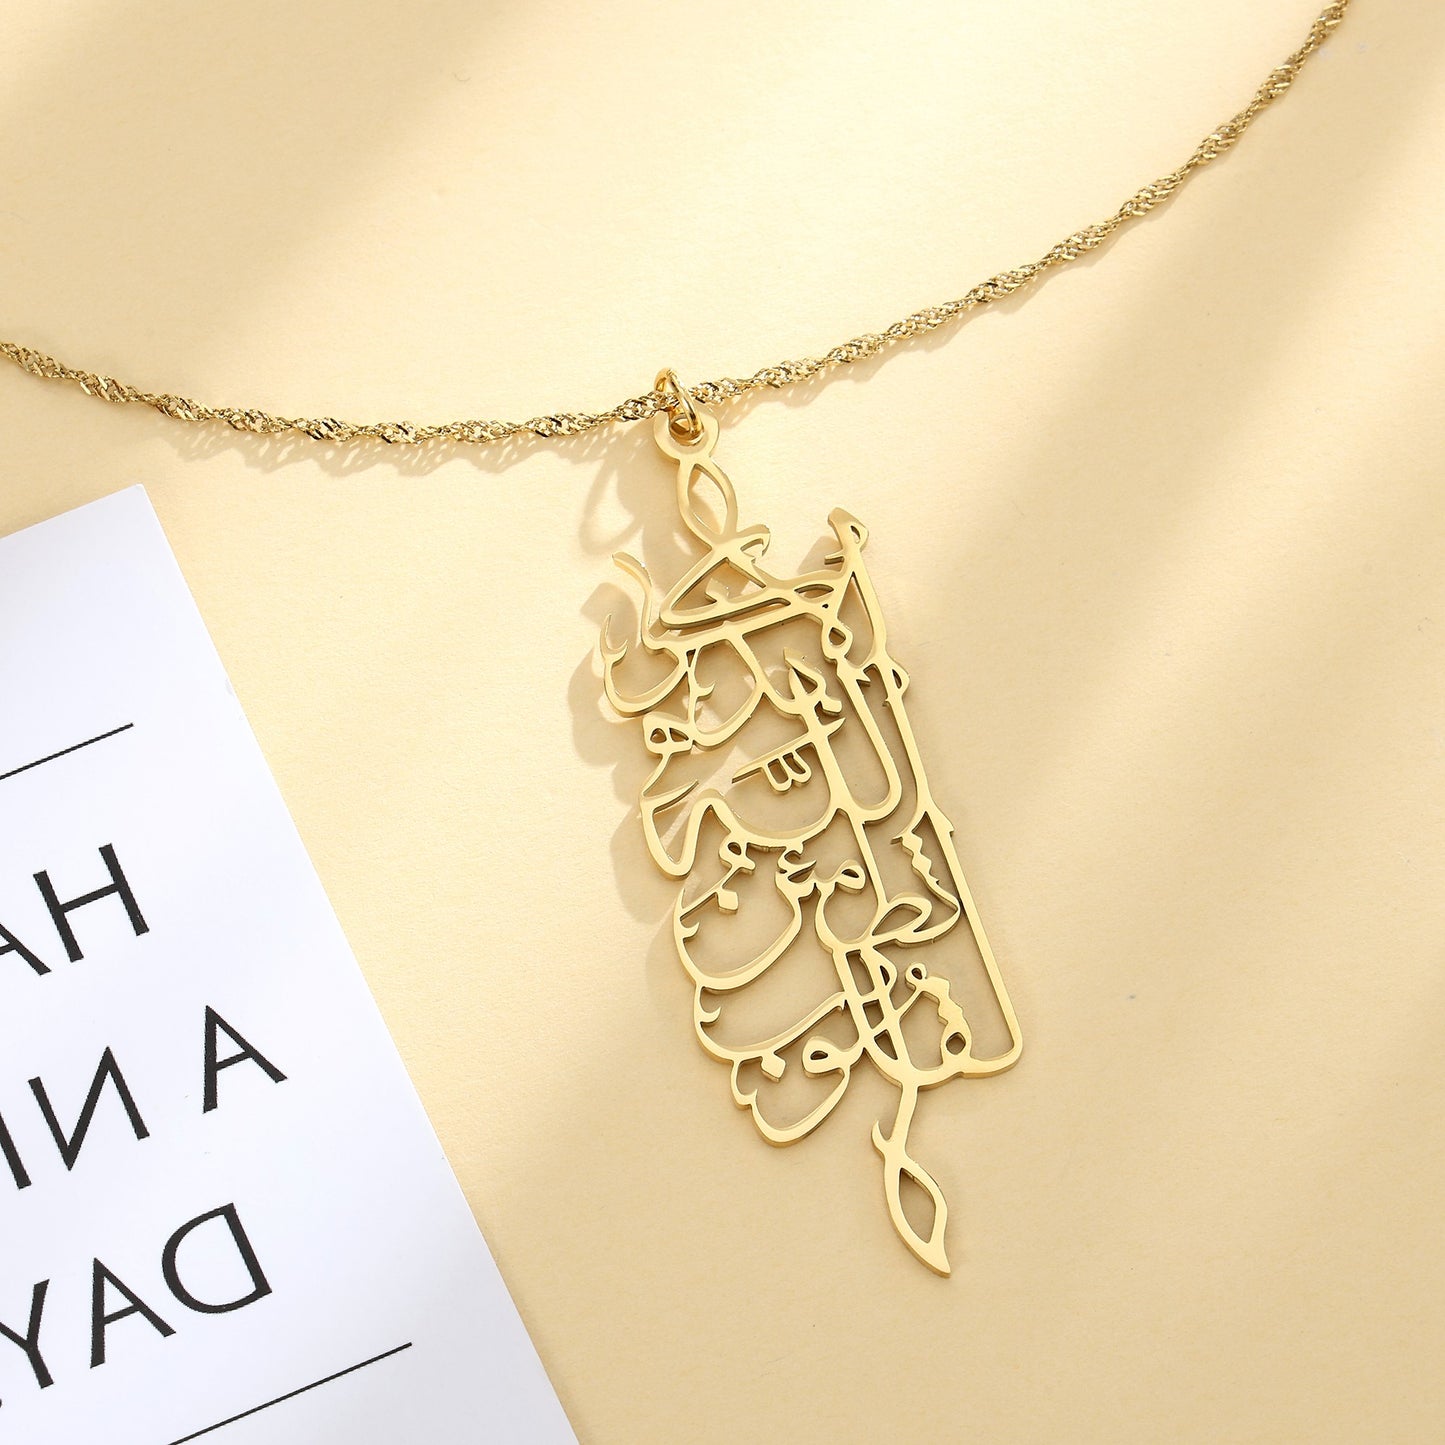 "Only in the remembrance of Allah will your hearts find peace" necklace